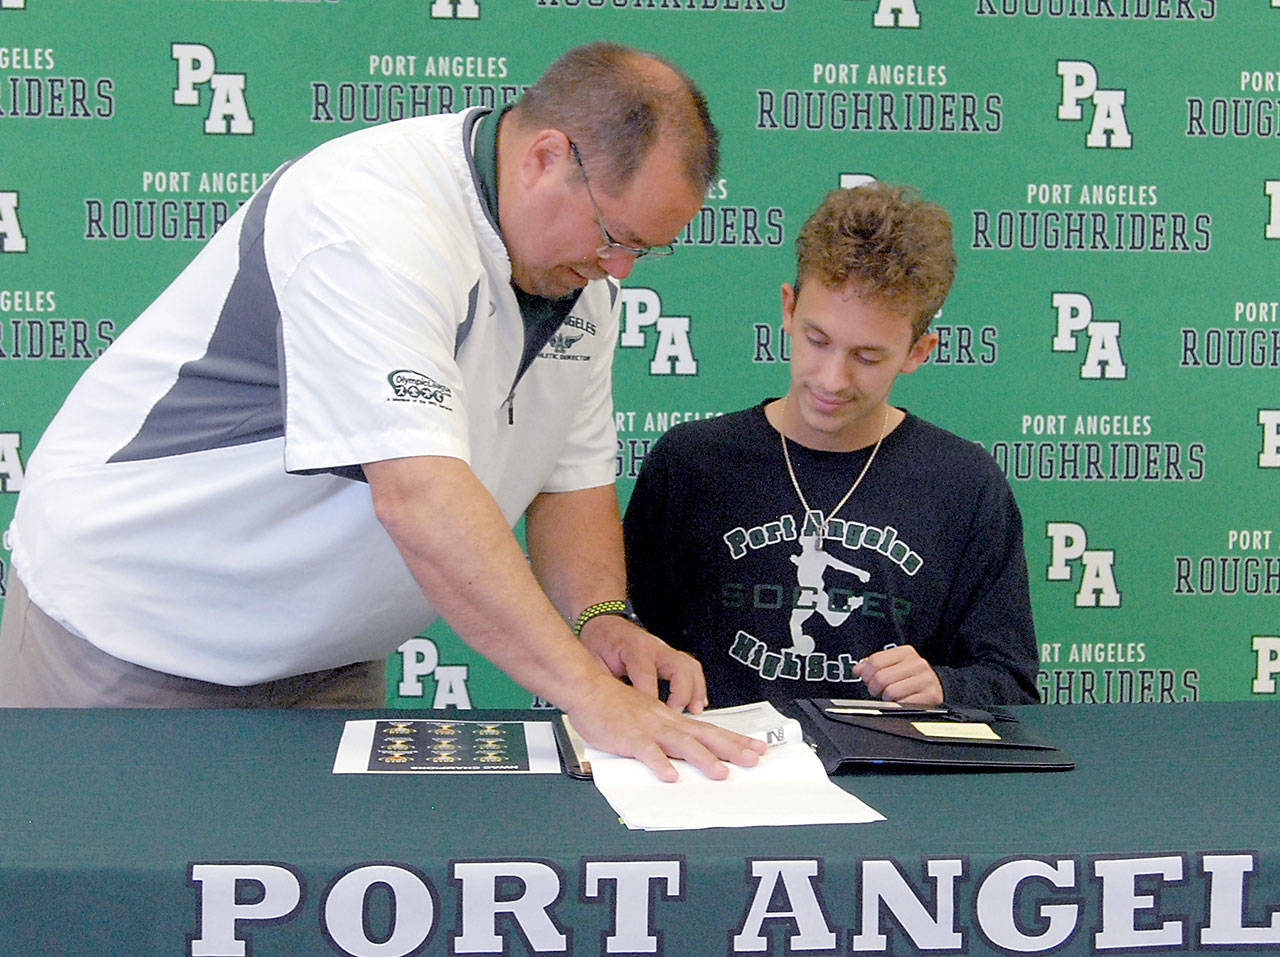 Keith Thorpe/Peinsula Daily News Port Amgeles High School athletic director Dwayne Johnson, left, goes over paperwork on Wednesday with Andrew St. George as St. George signs a letter of intent to attend Peninsula College.